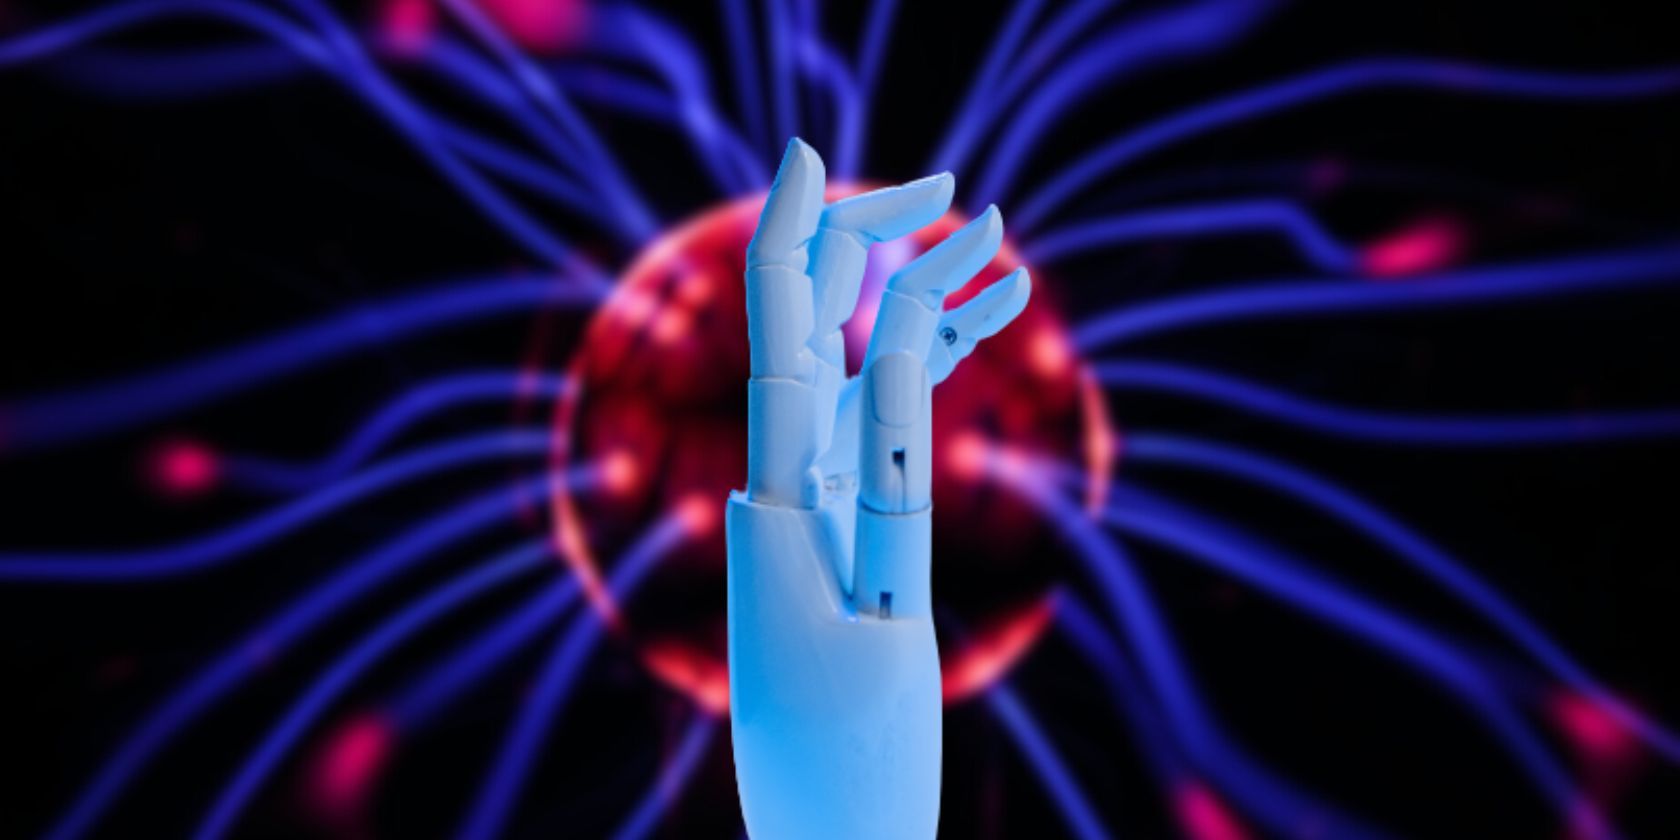 Robot Hand Fingers Pointing and Blurred Brain Neuron Behind It